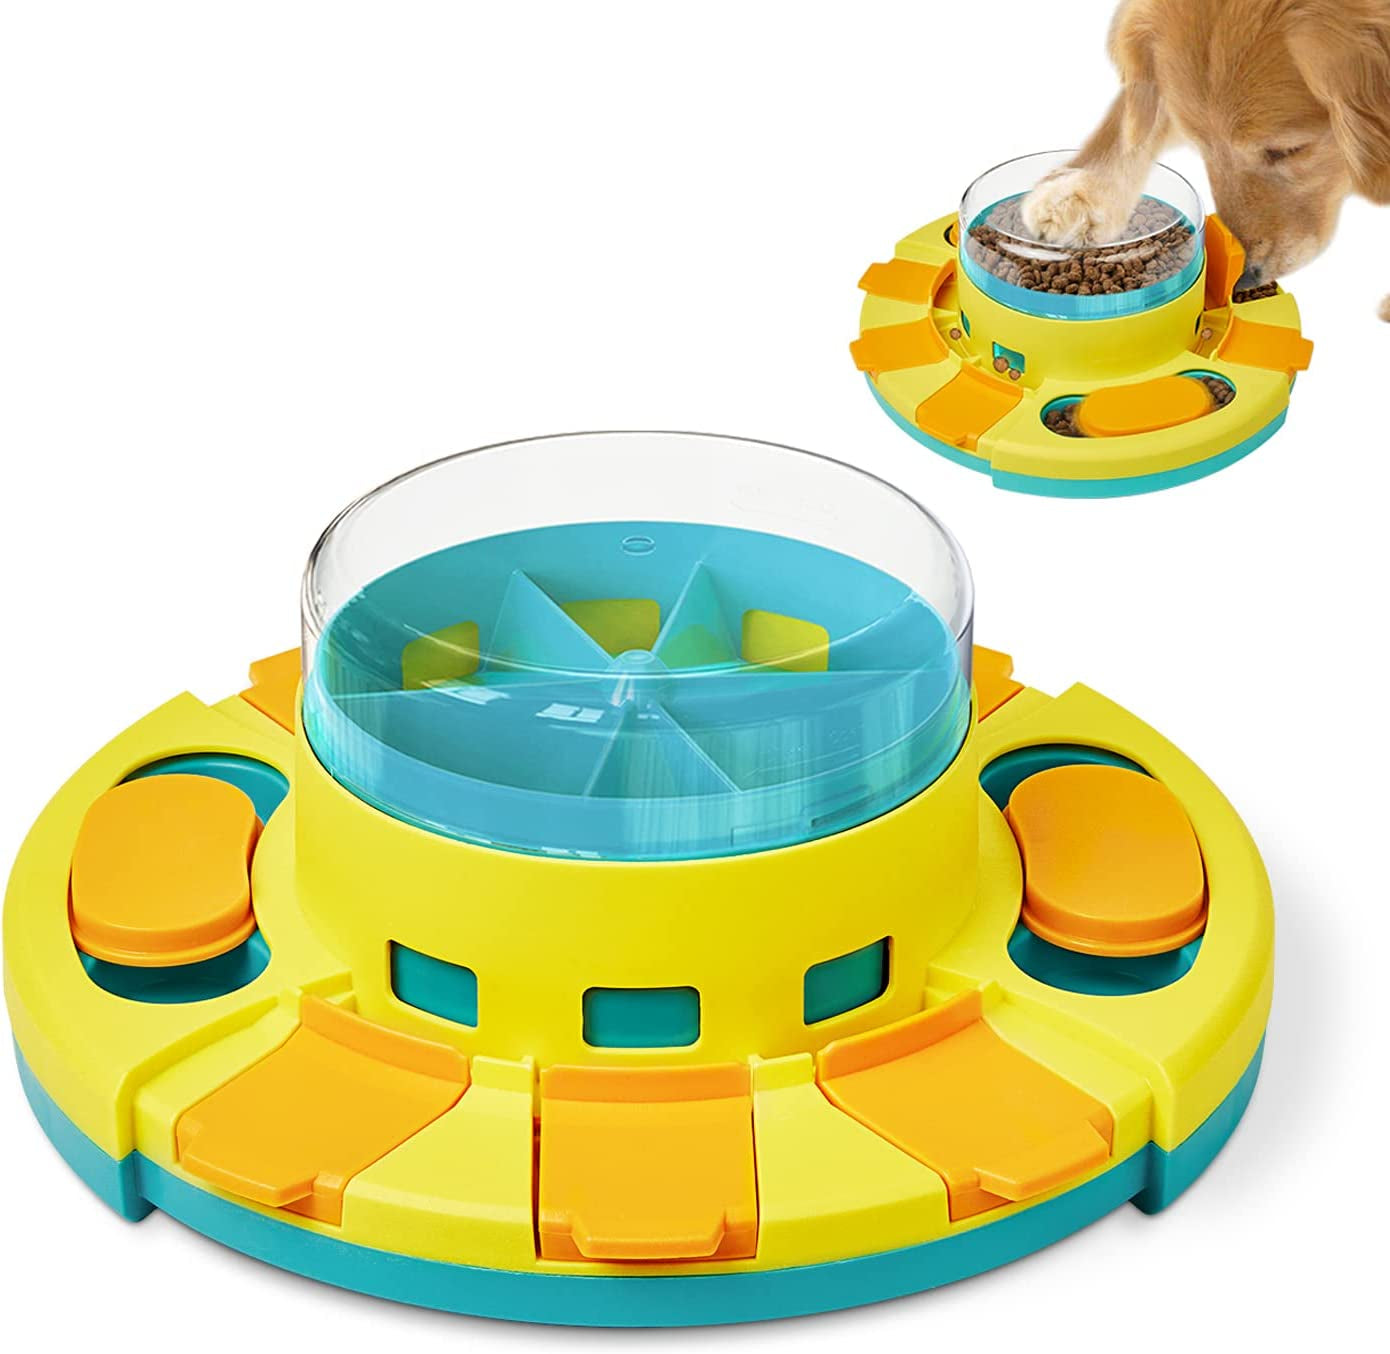 Dog Puzzle Toy 2 Levels, Slow Feeder, Dog Food Treat Feeding Toys for IQ Training, Dog Entertainment Toys for All Breeds 4.2 Inch Height